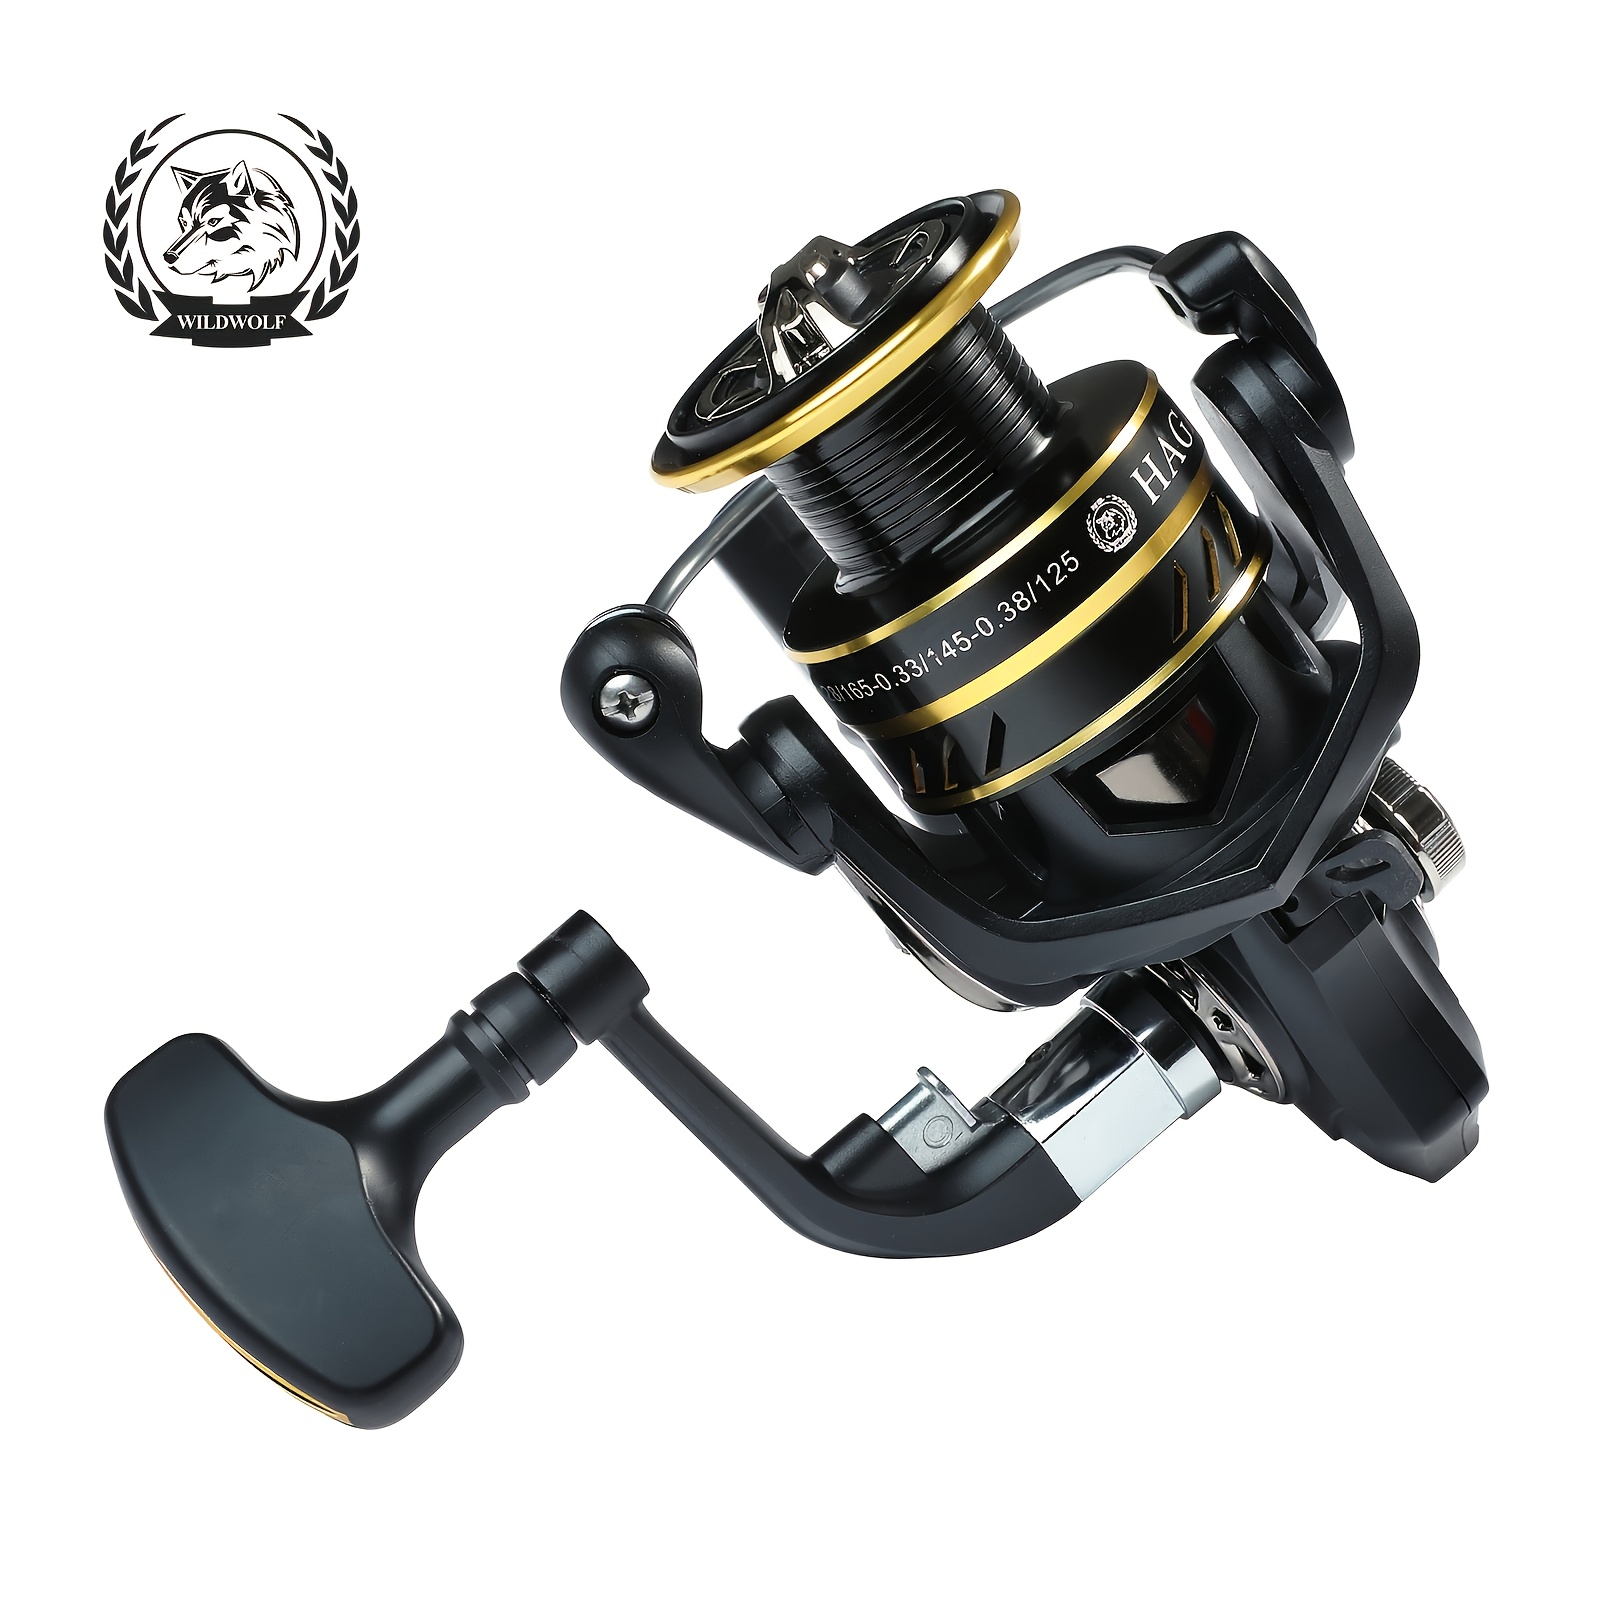 FISHING Dual Handle Spinning Reel, 5.2 1 Gear Ratio, 7+1 Bearing Effortless  Fishing Experience for Left and Right Hand Anglers